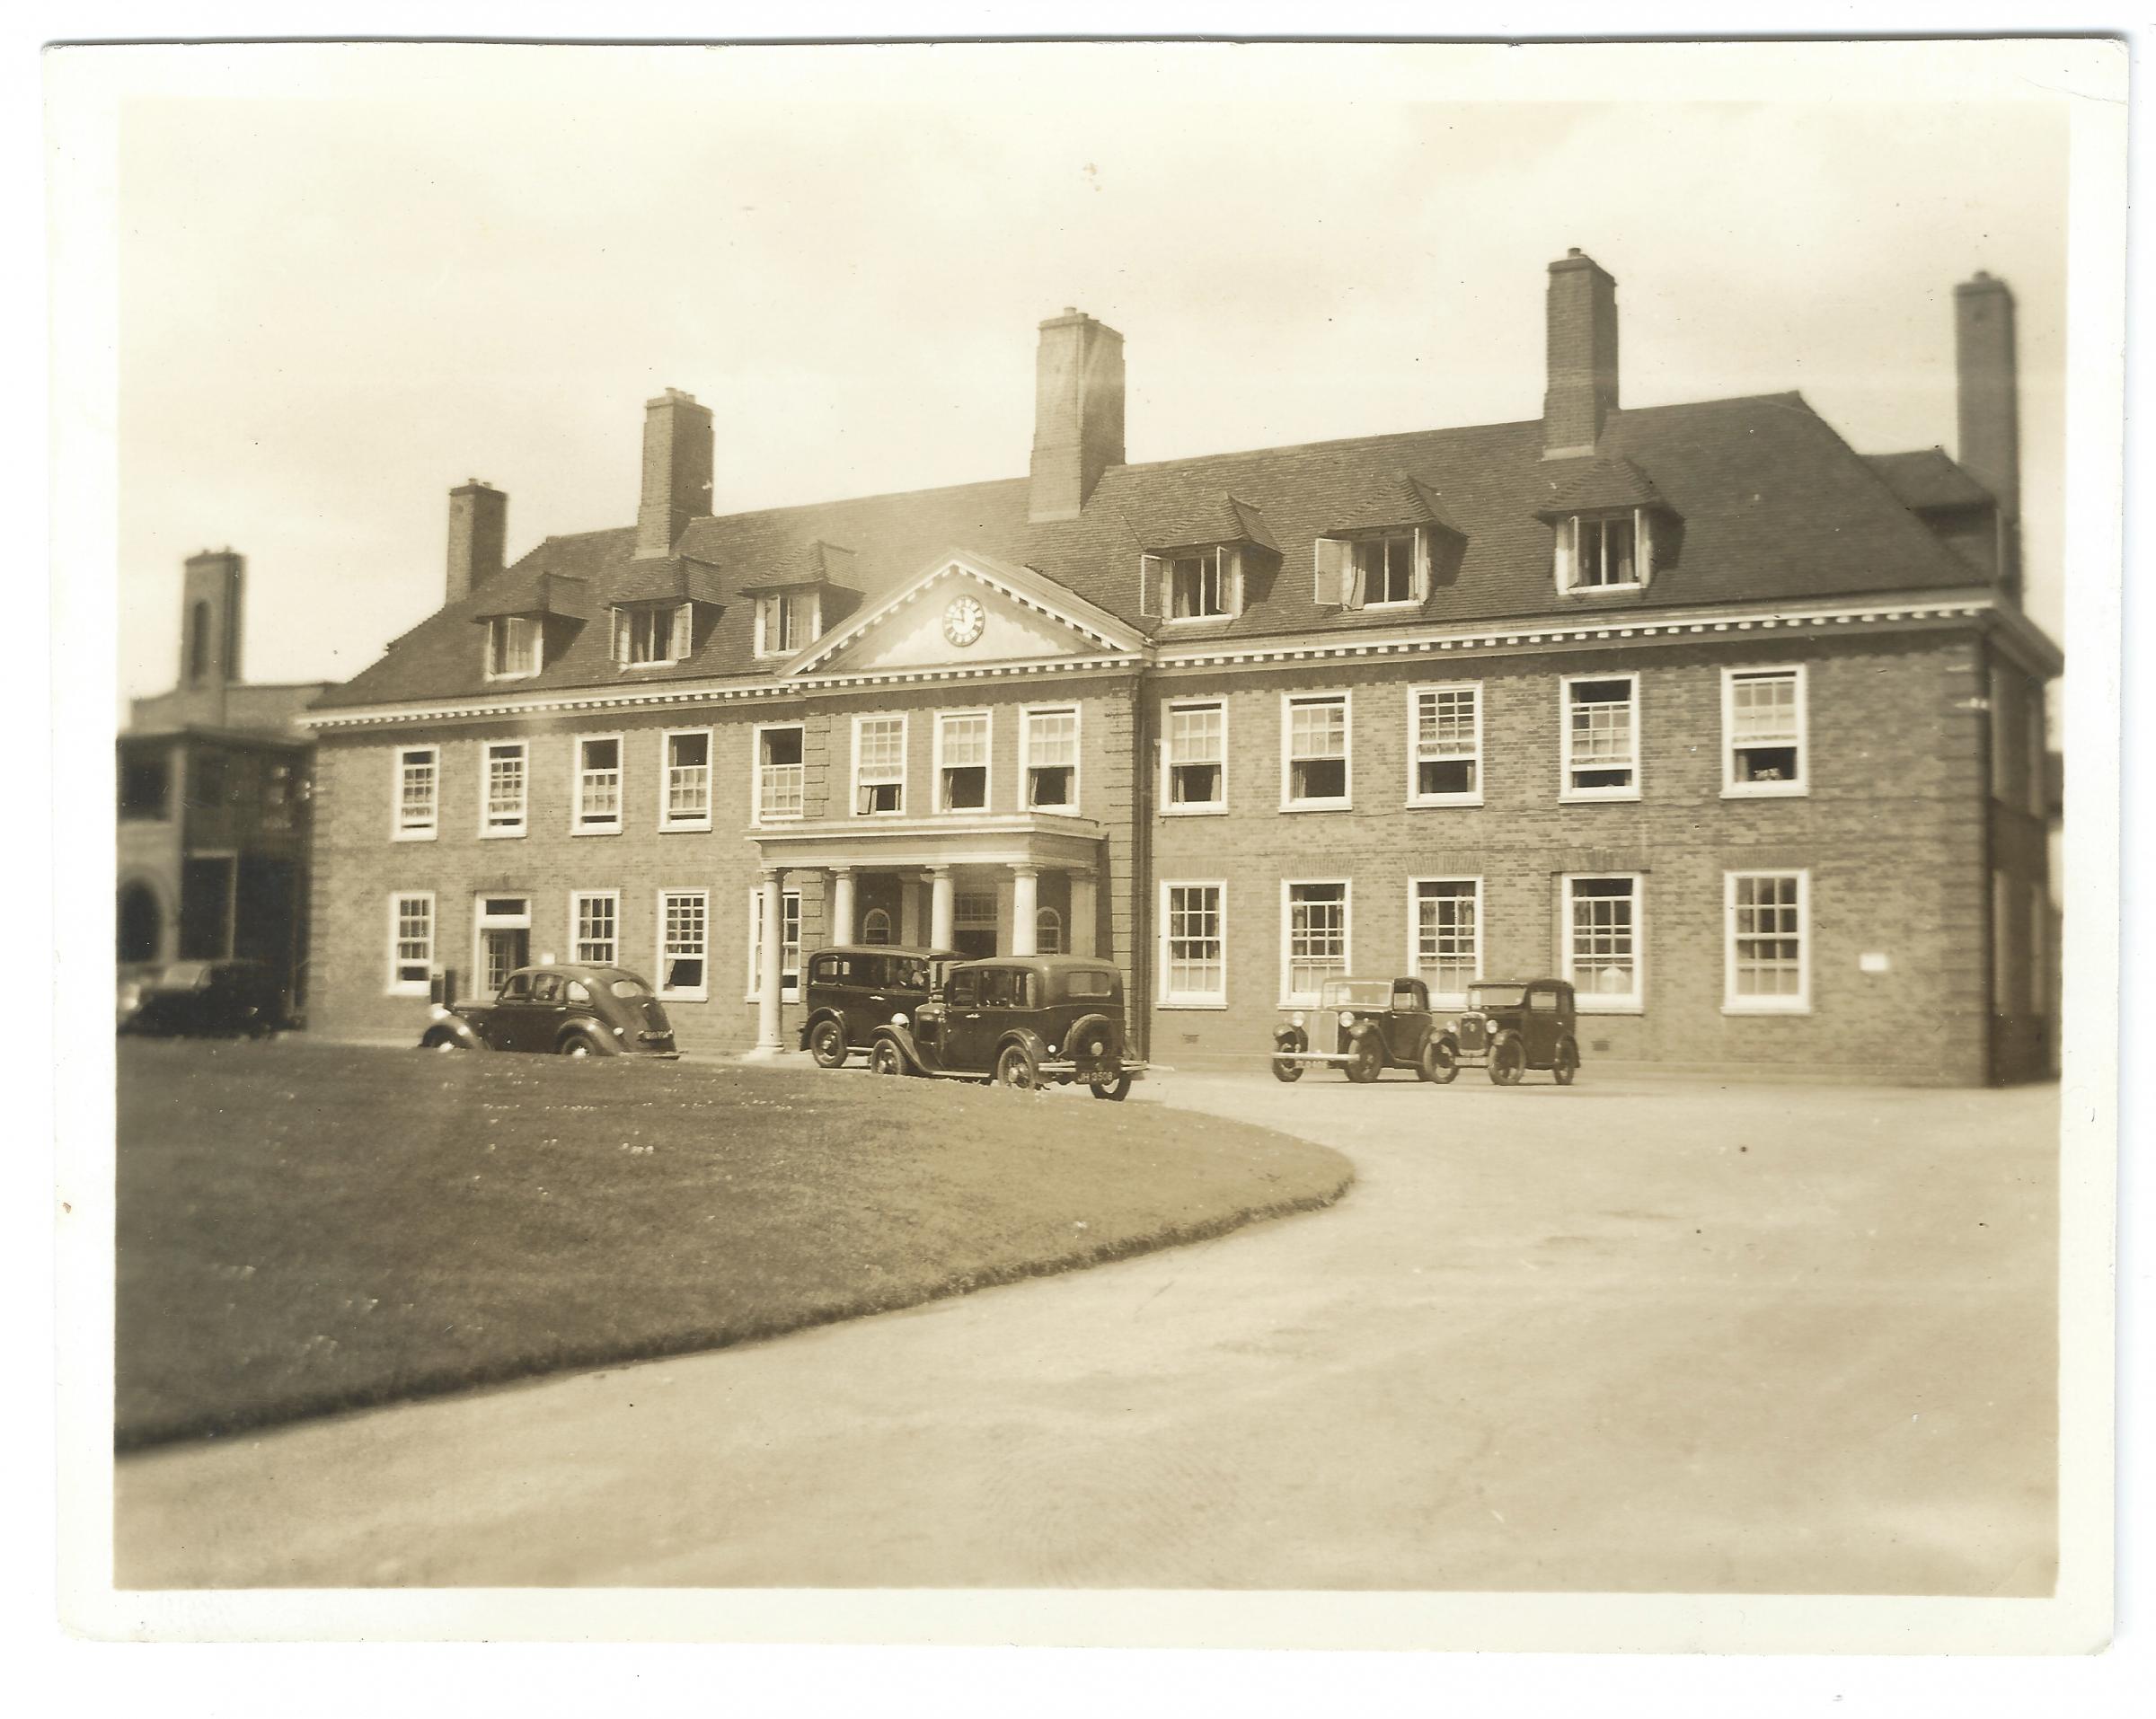 The Peace Memorial Hospital in the 1930s